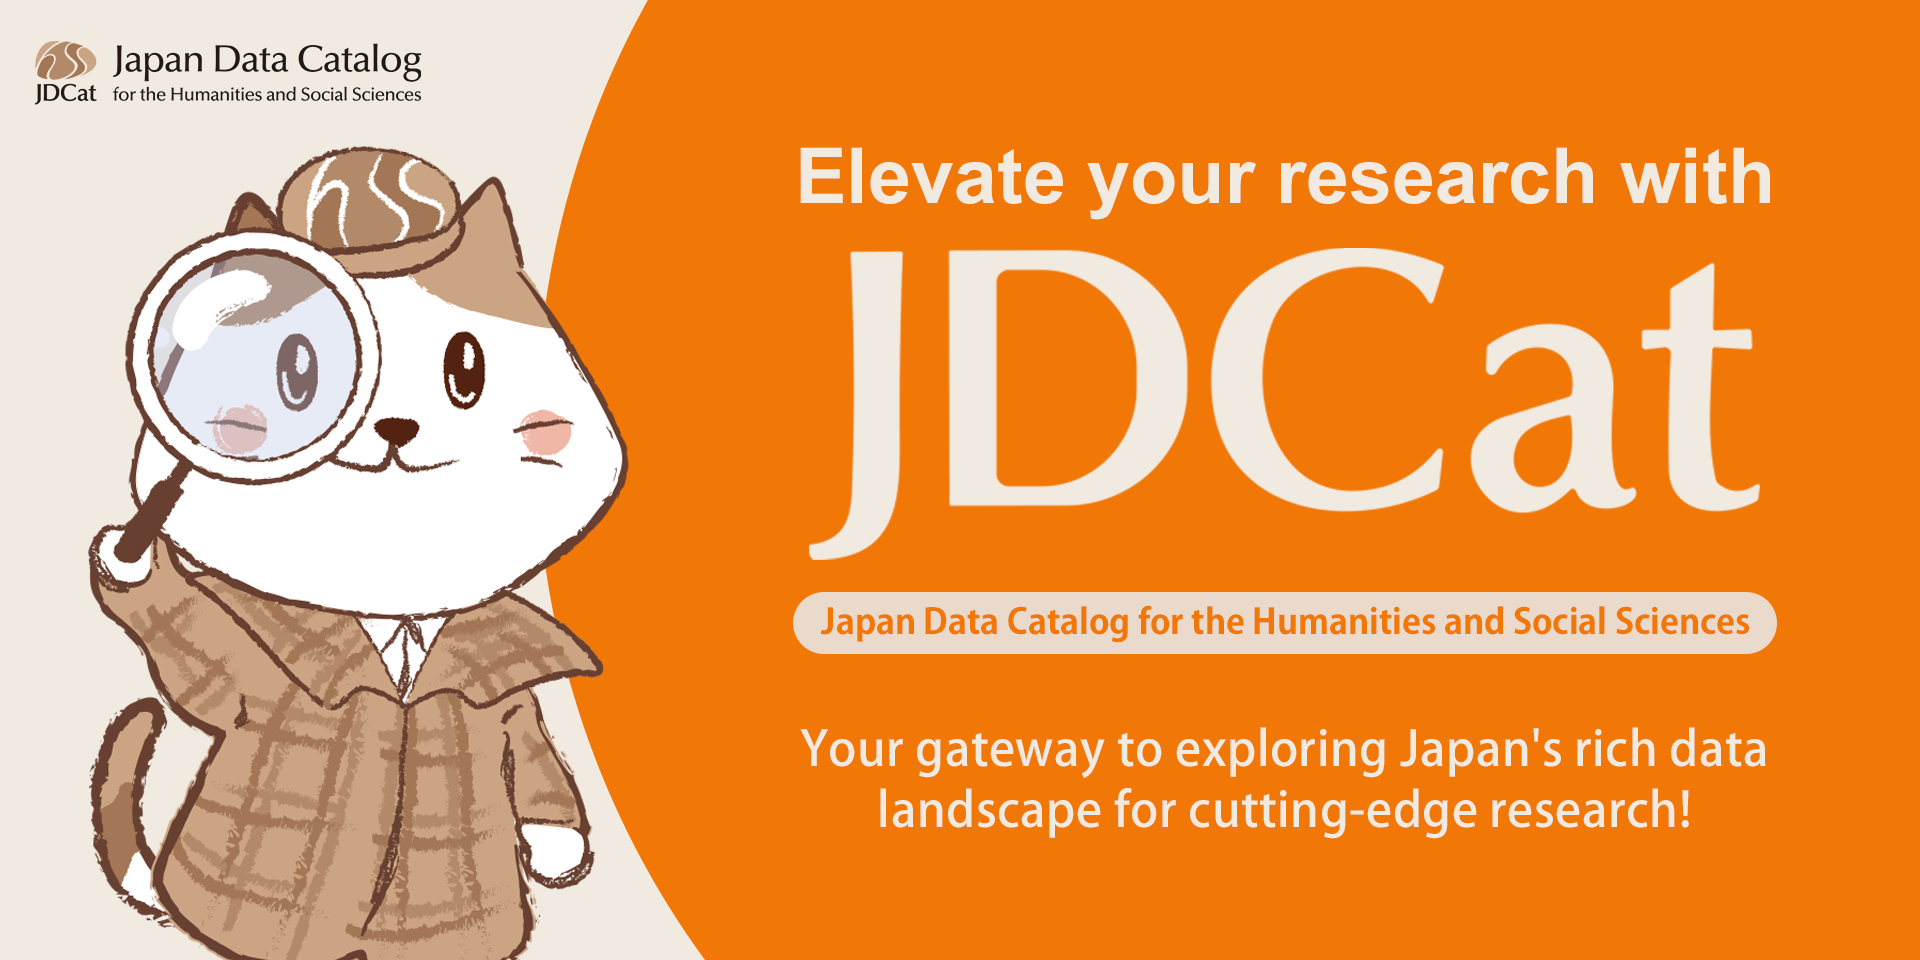 Evaluate your research with JDCat